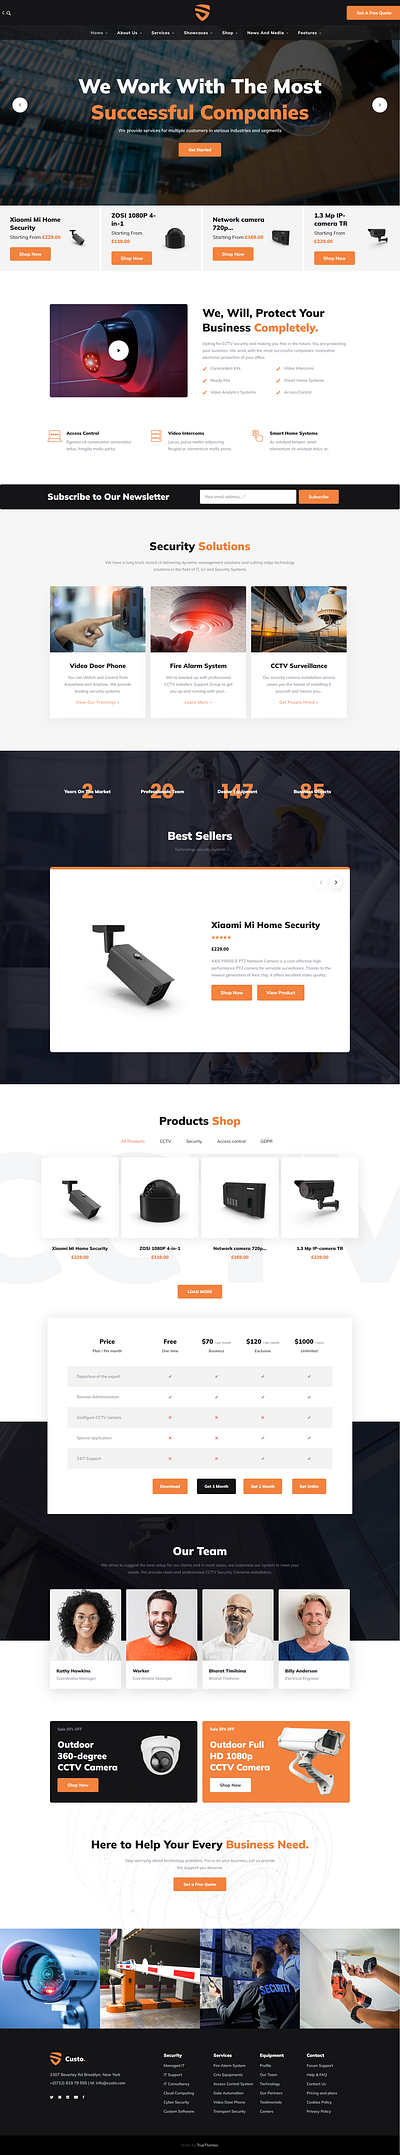 Complete a Cctv shop and security projects modern website responsive website responsive wordpress website wordpress wordpress design